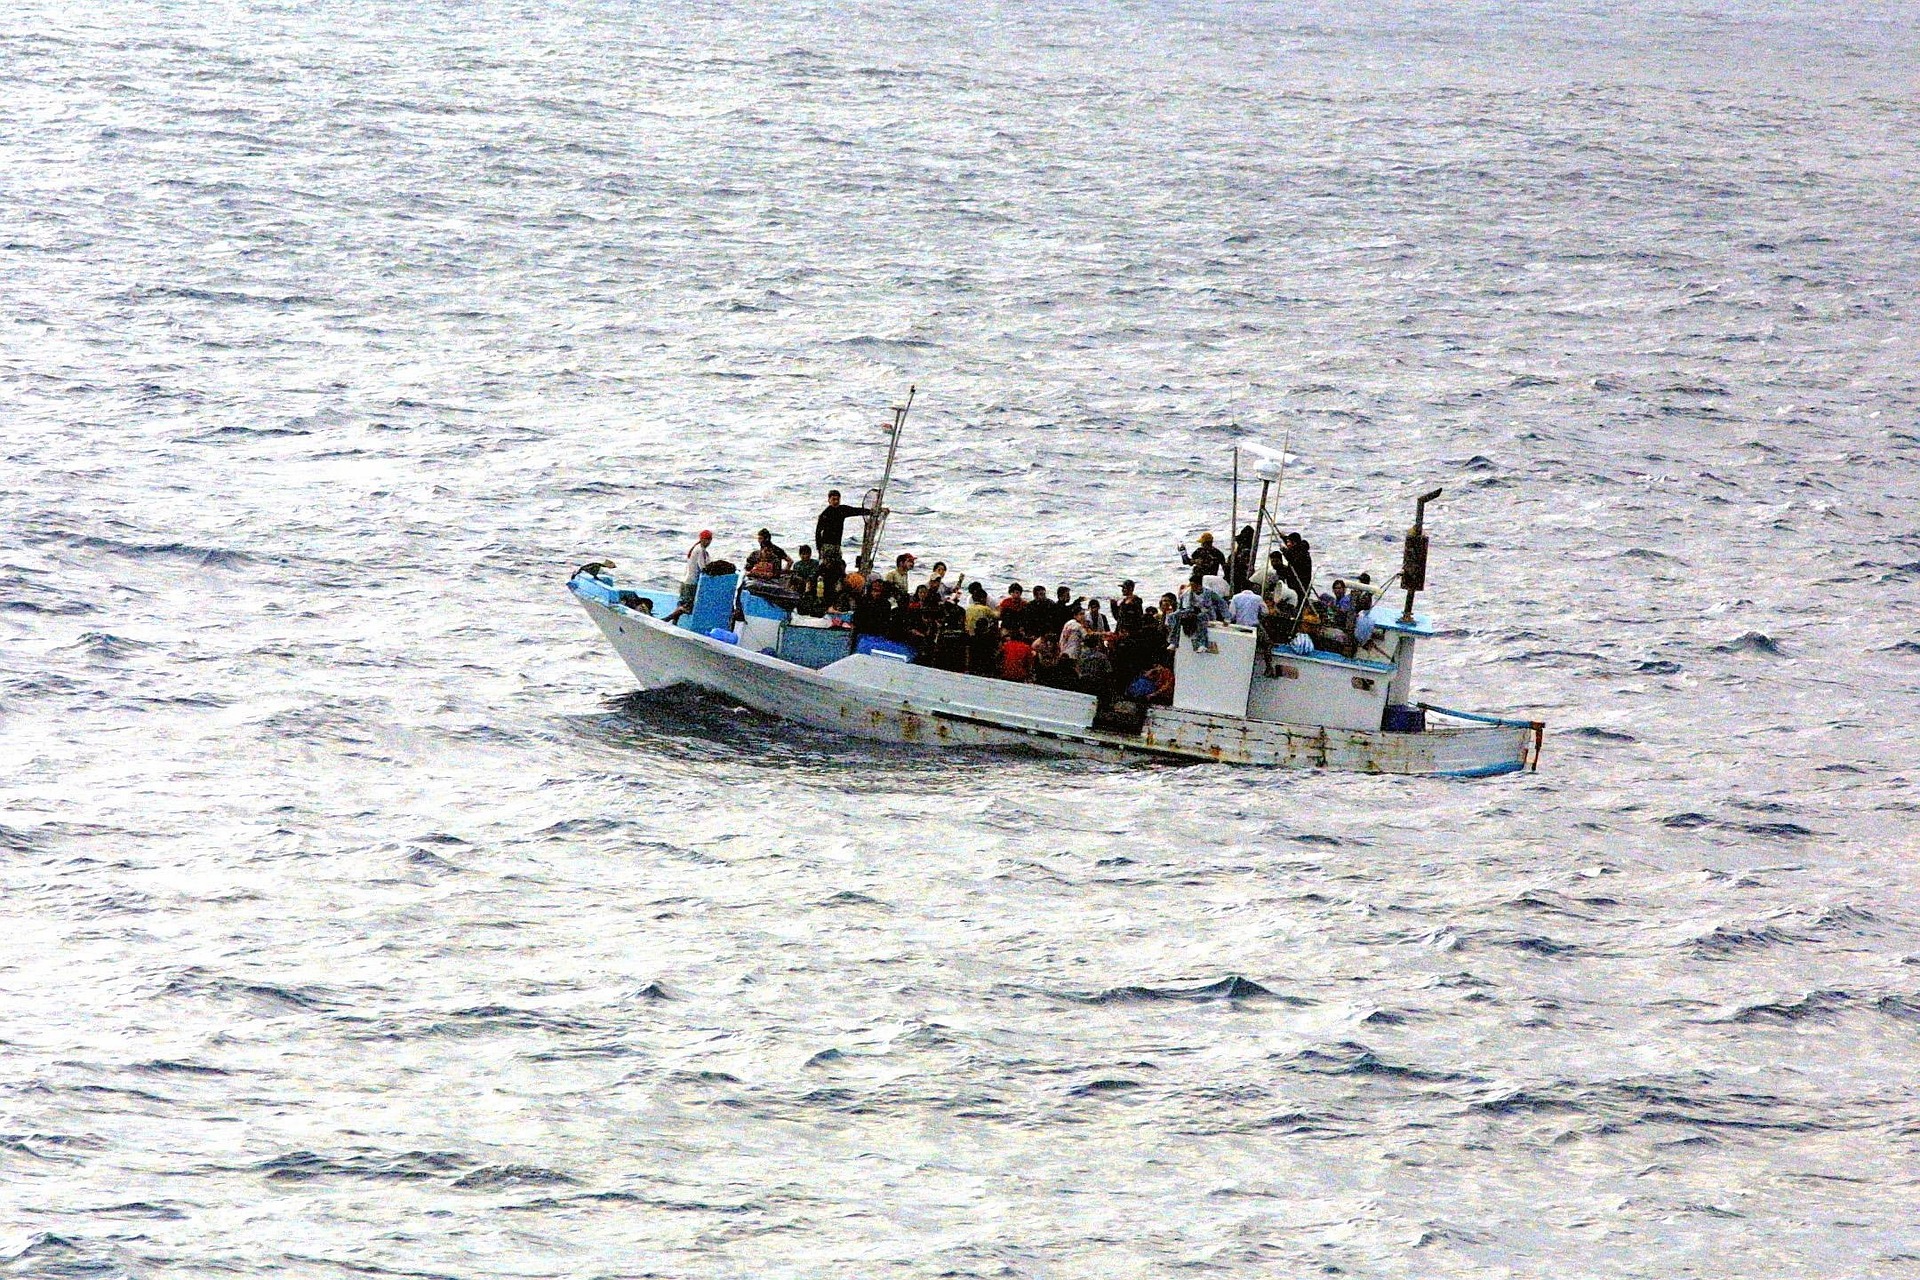 Migrant smuggling and human trafficking from Libya to Europe